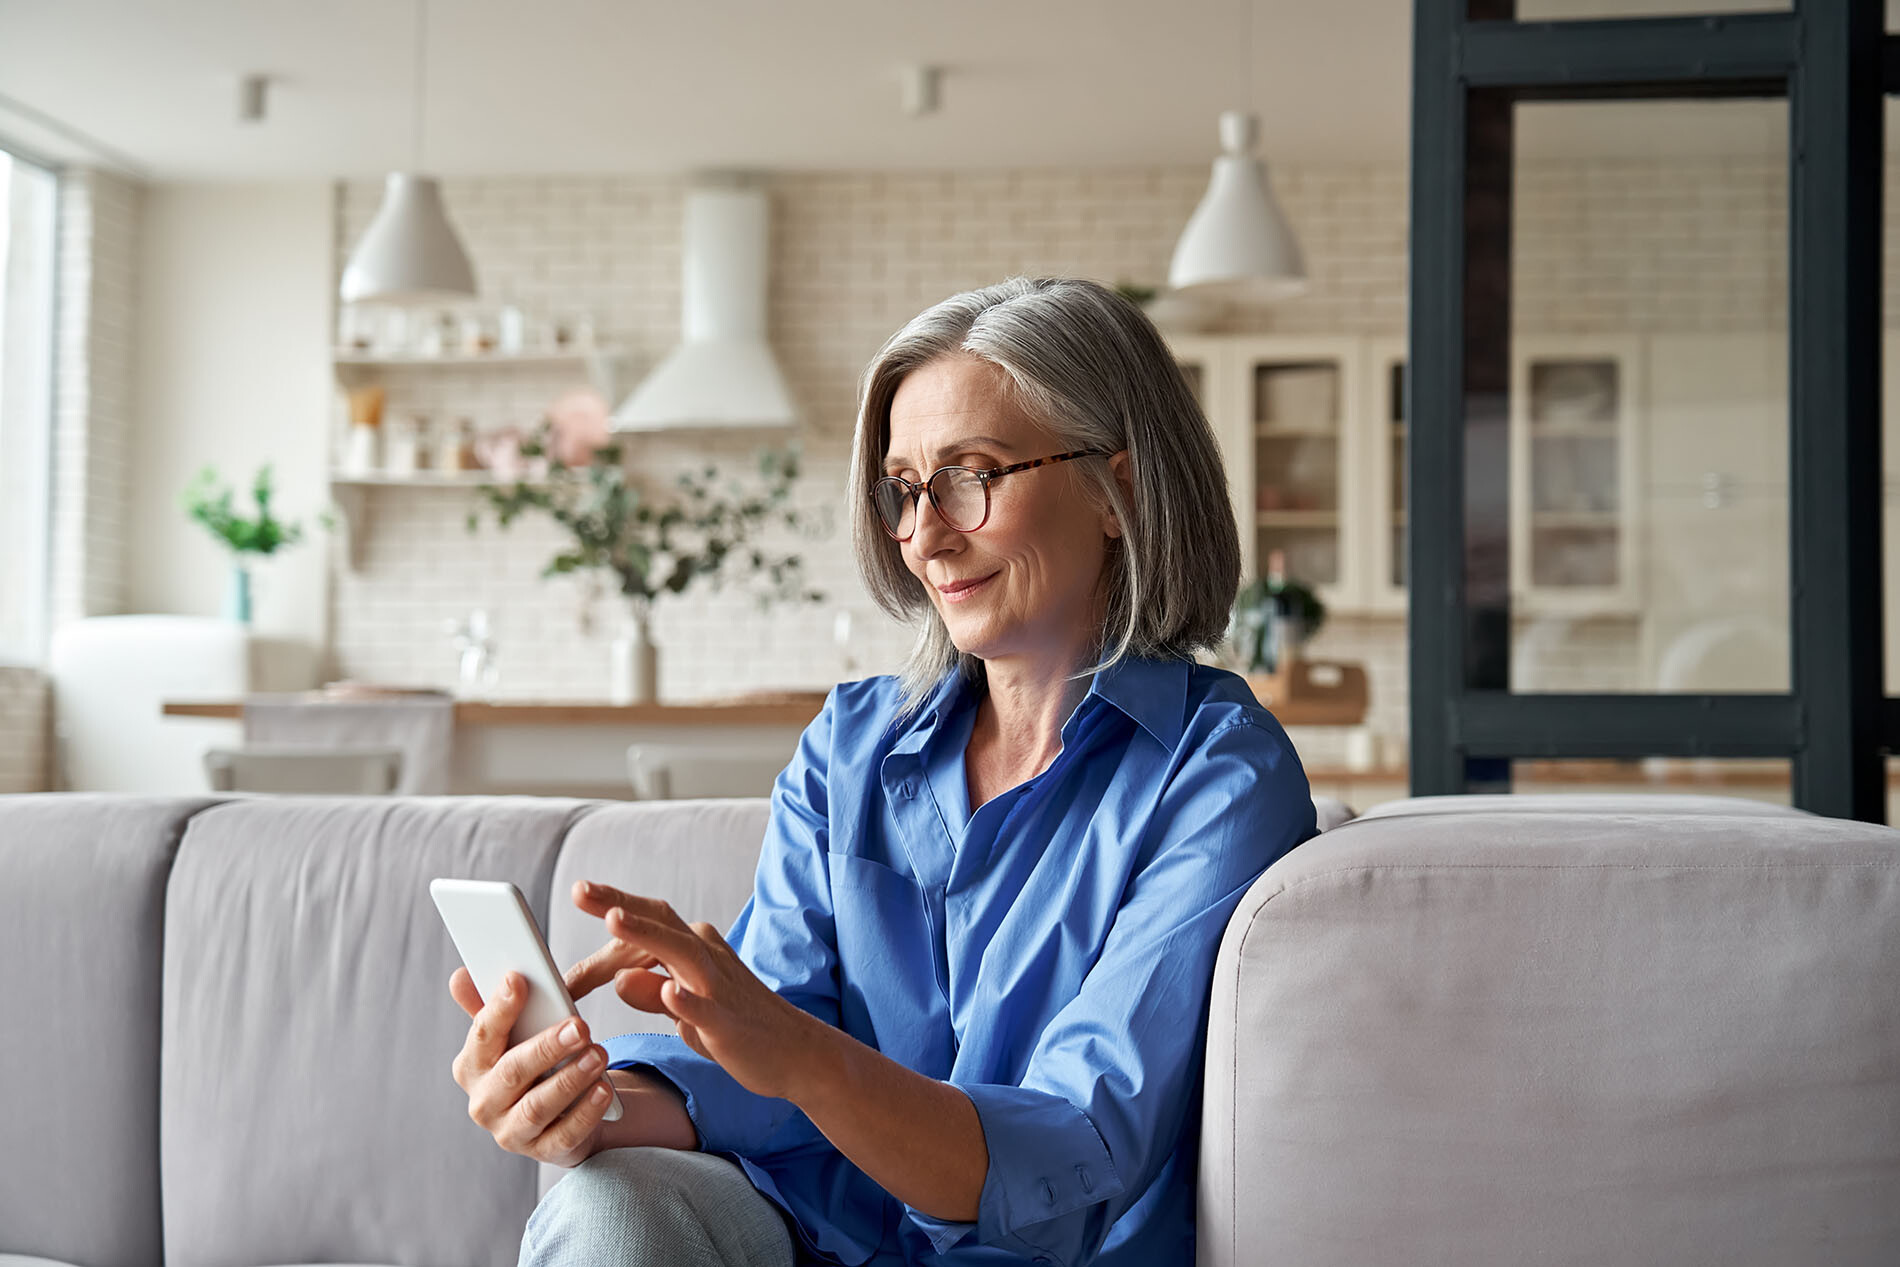 Woman with chin-length gray hair watching videos on a smartphone